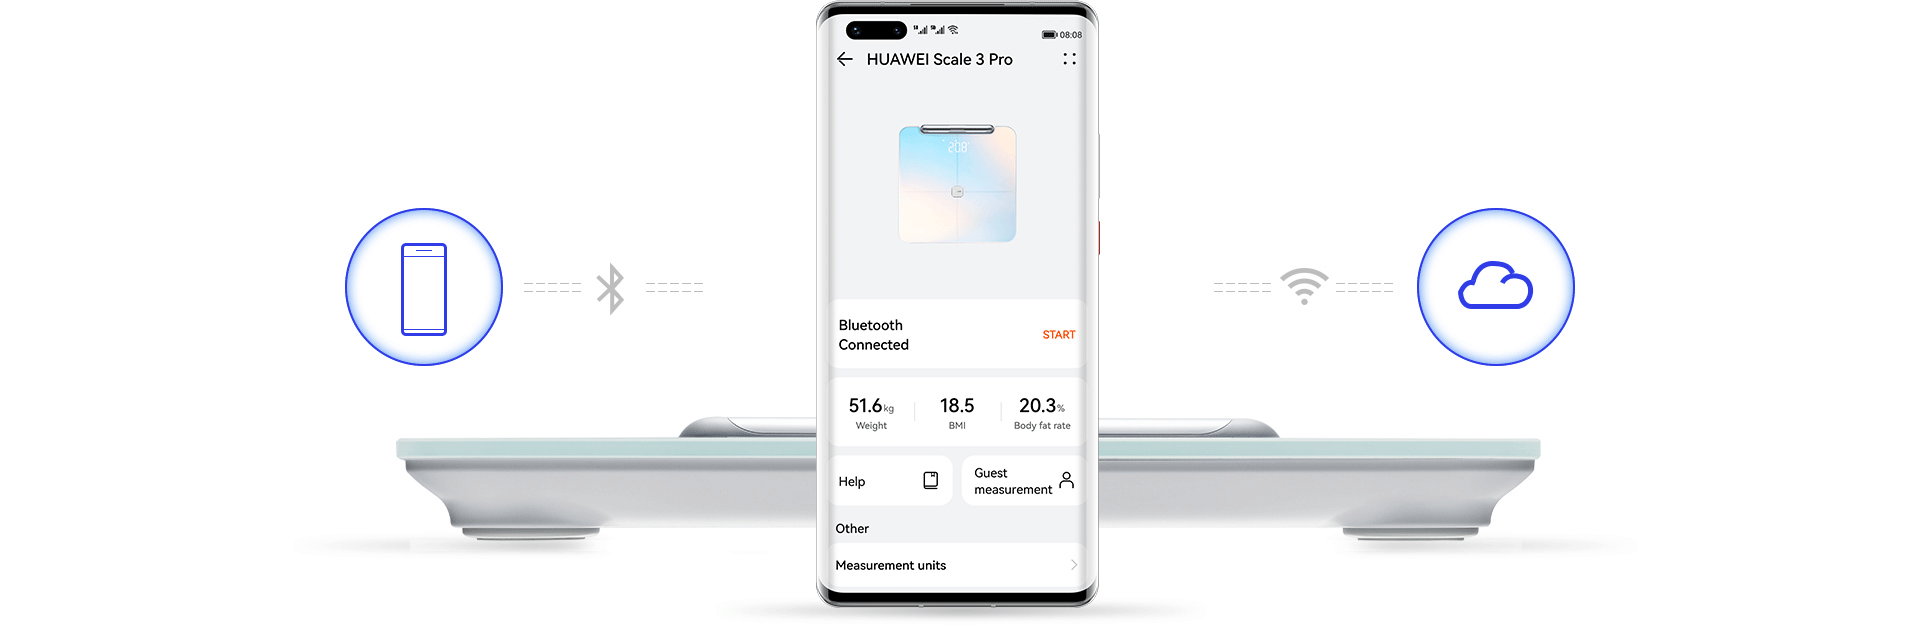 HUAWEI Scale 3 Pro Connection